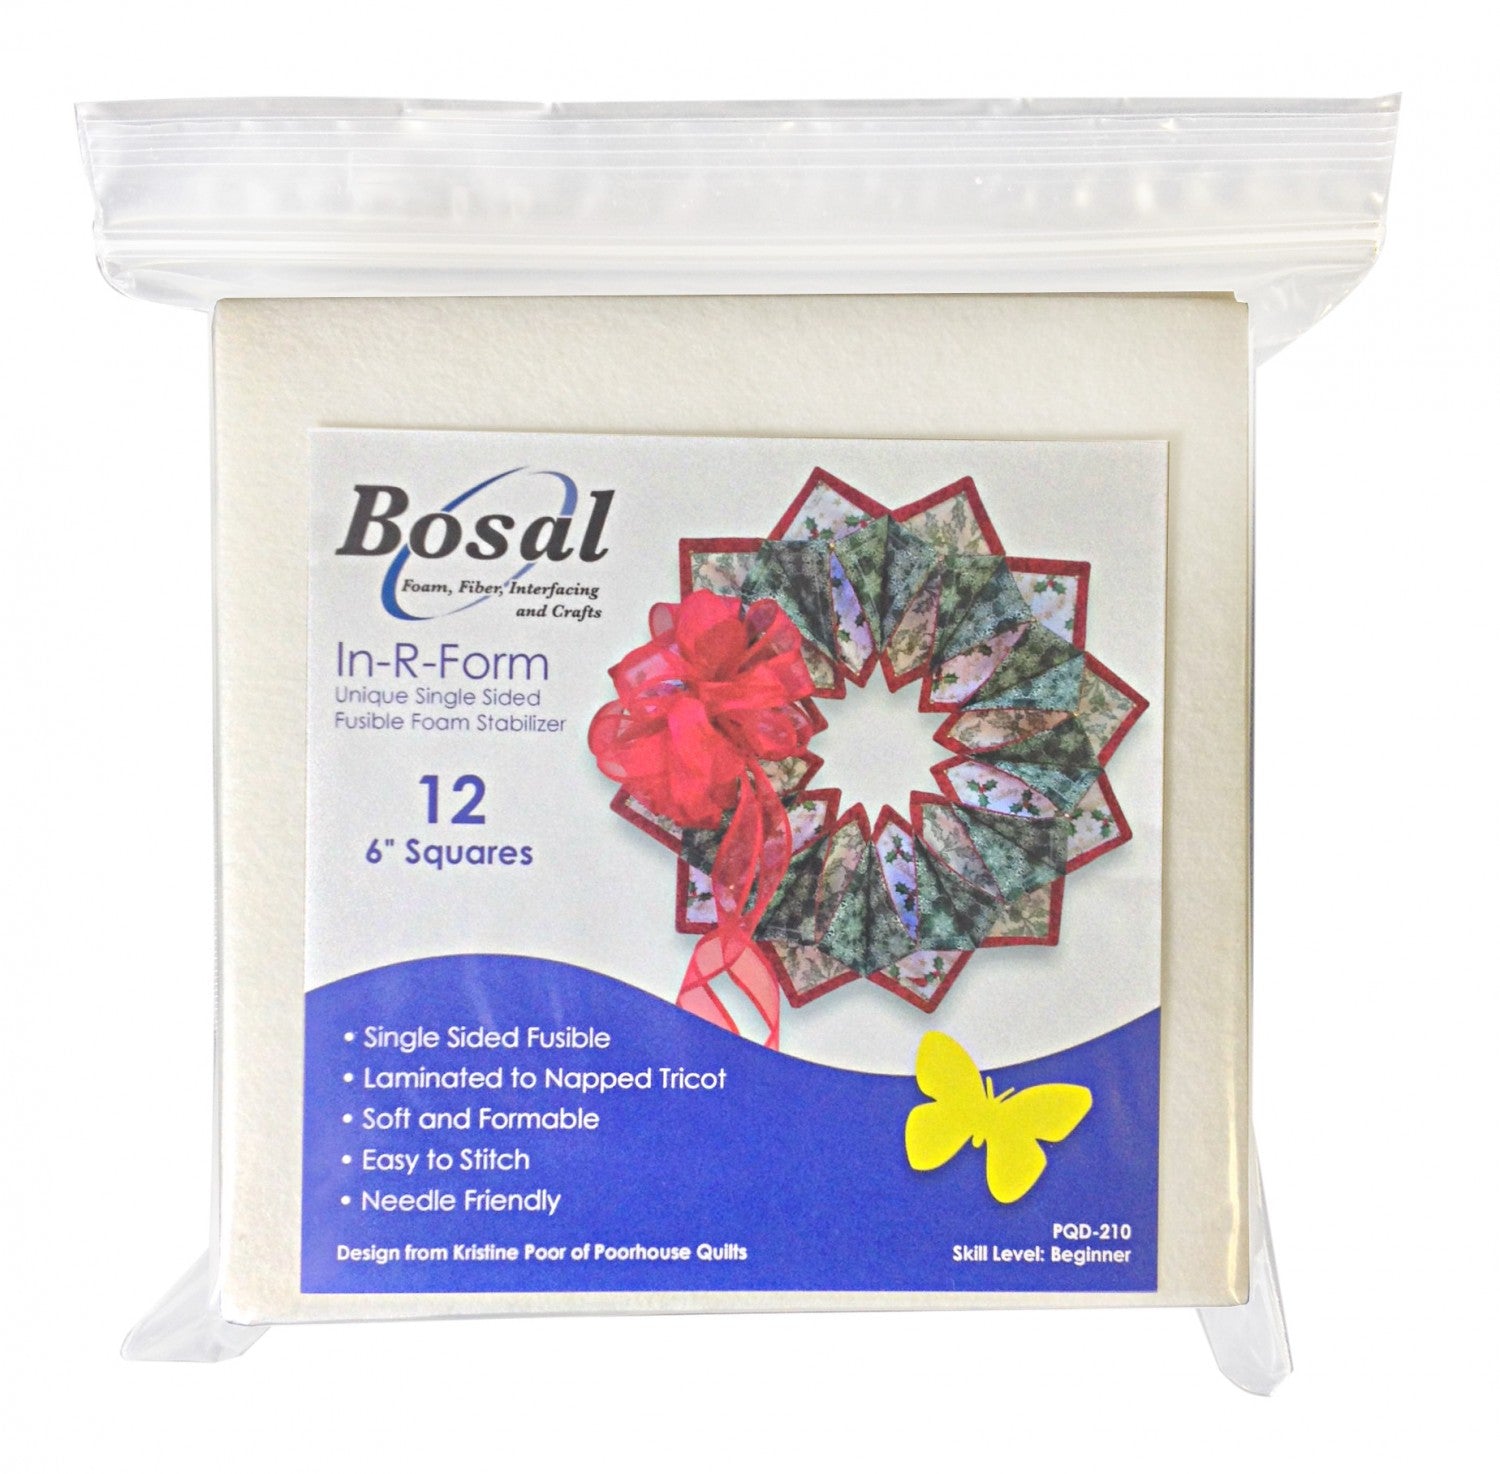 Bosal Stick-stitch-n-rinse Wash Away Stabilizer Ideal for Embroidery 10  Sheets 8 1/2 X 11 